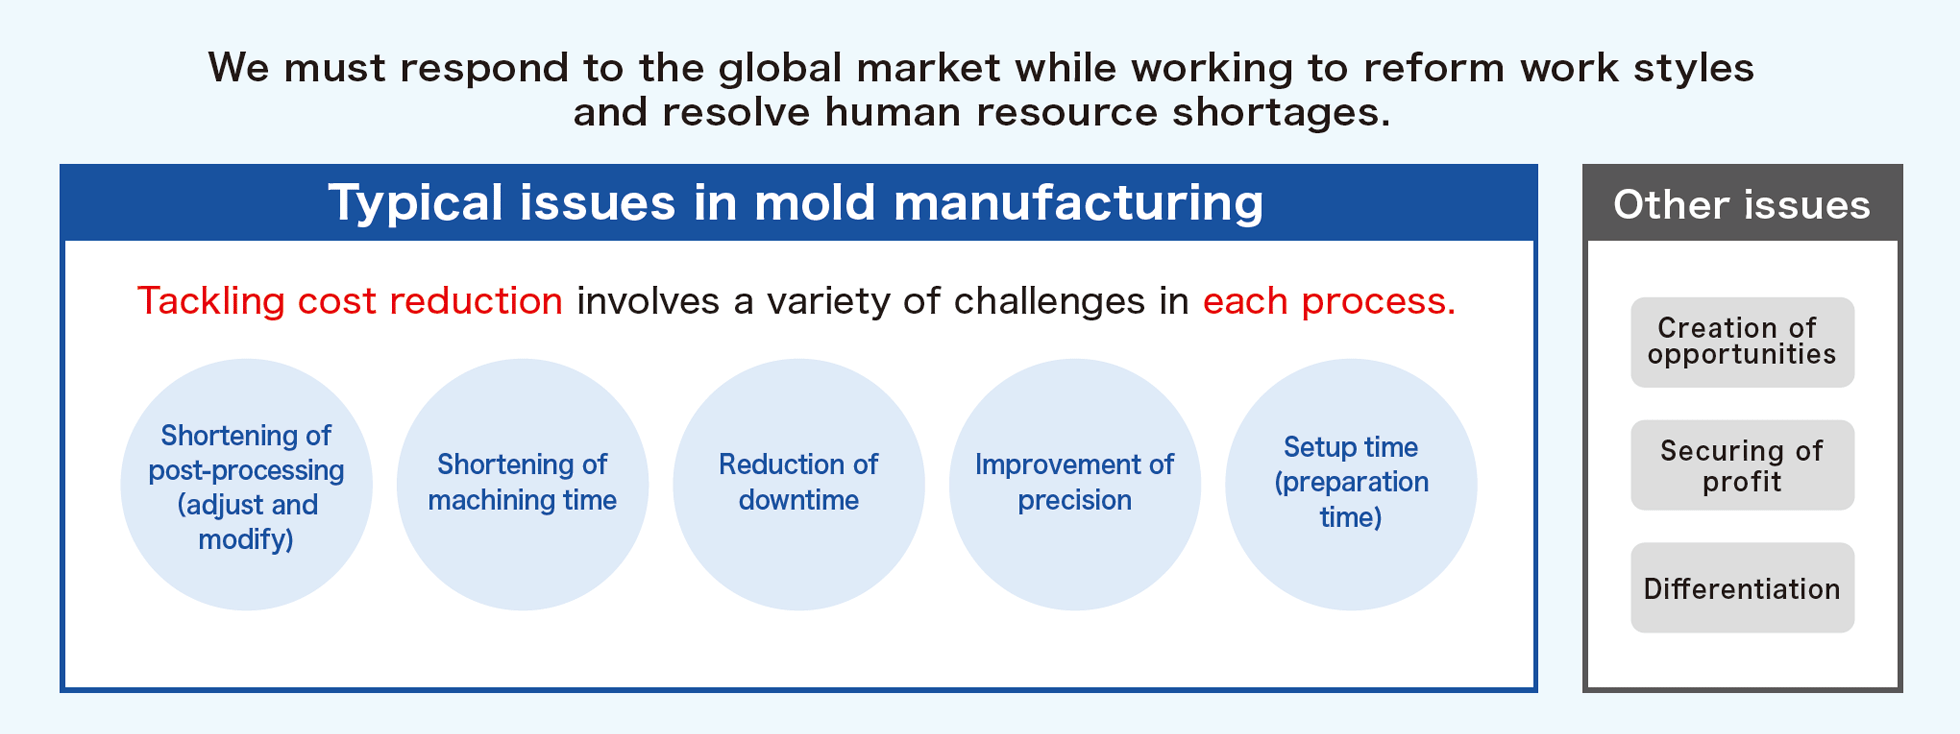 We must respond to the global market while working on work style reforms and resolving the shortage of human resources.